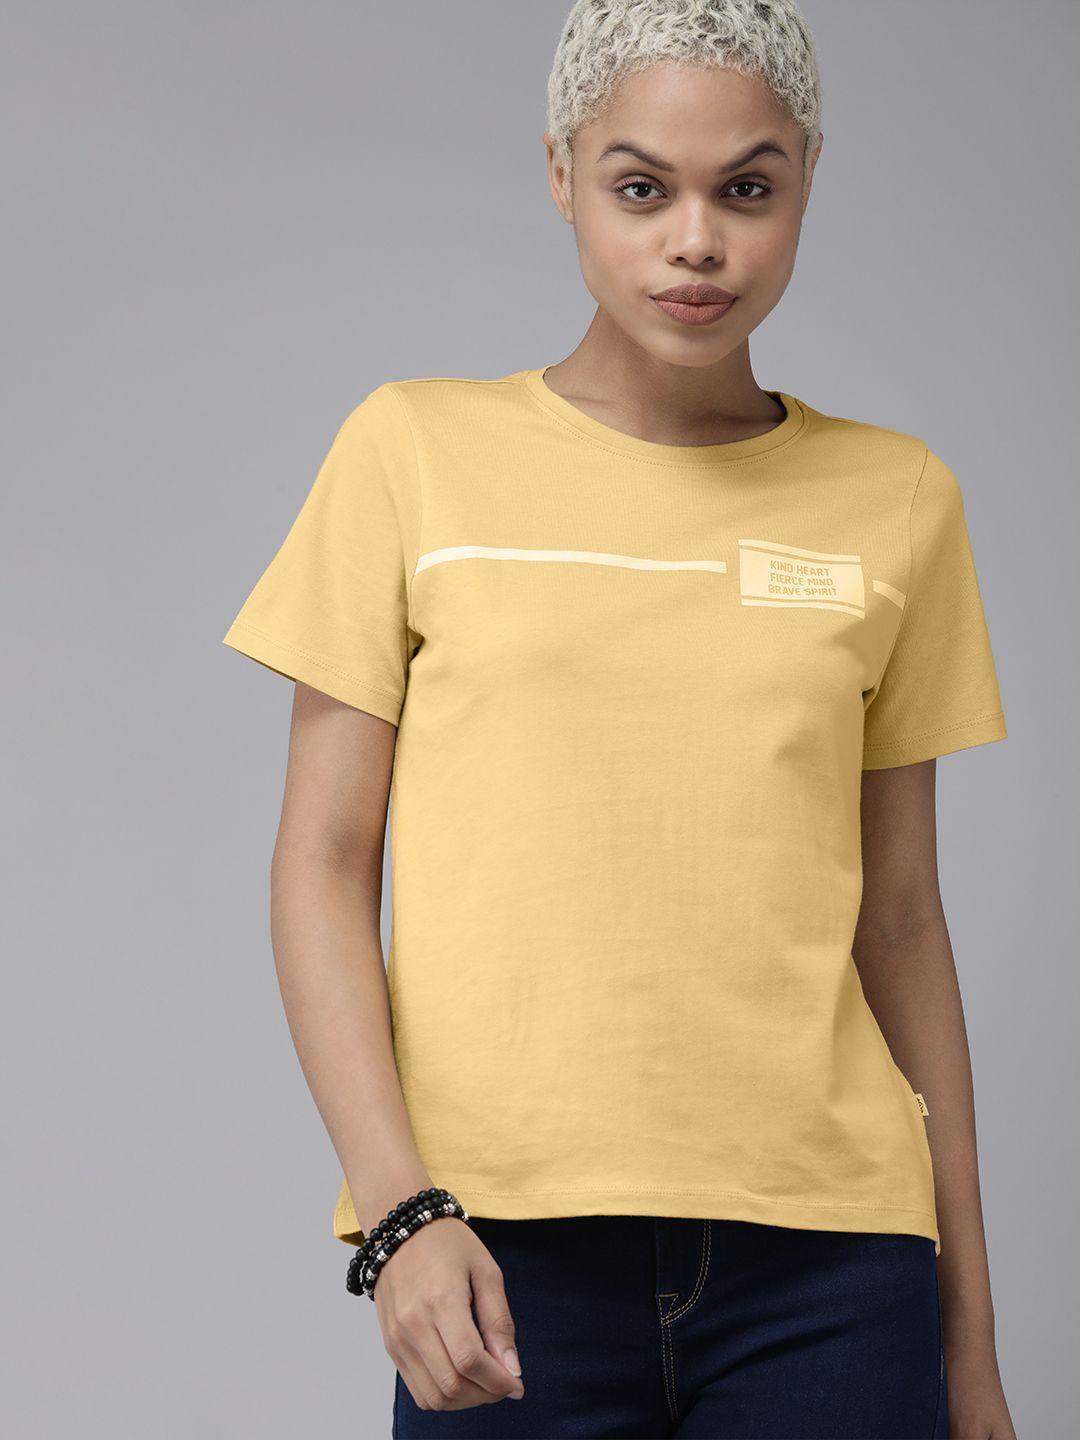 the roadster lifestyle co women yellow & white typography printed pure cotton  t-shirt